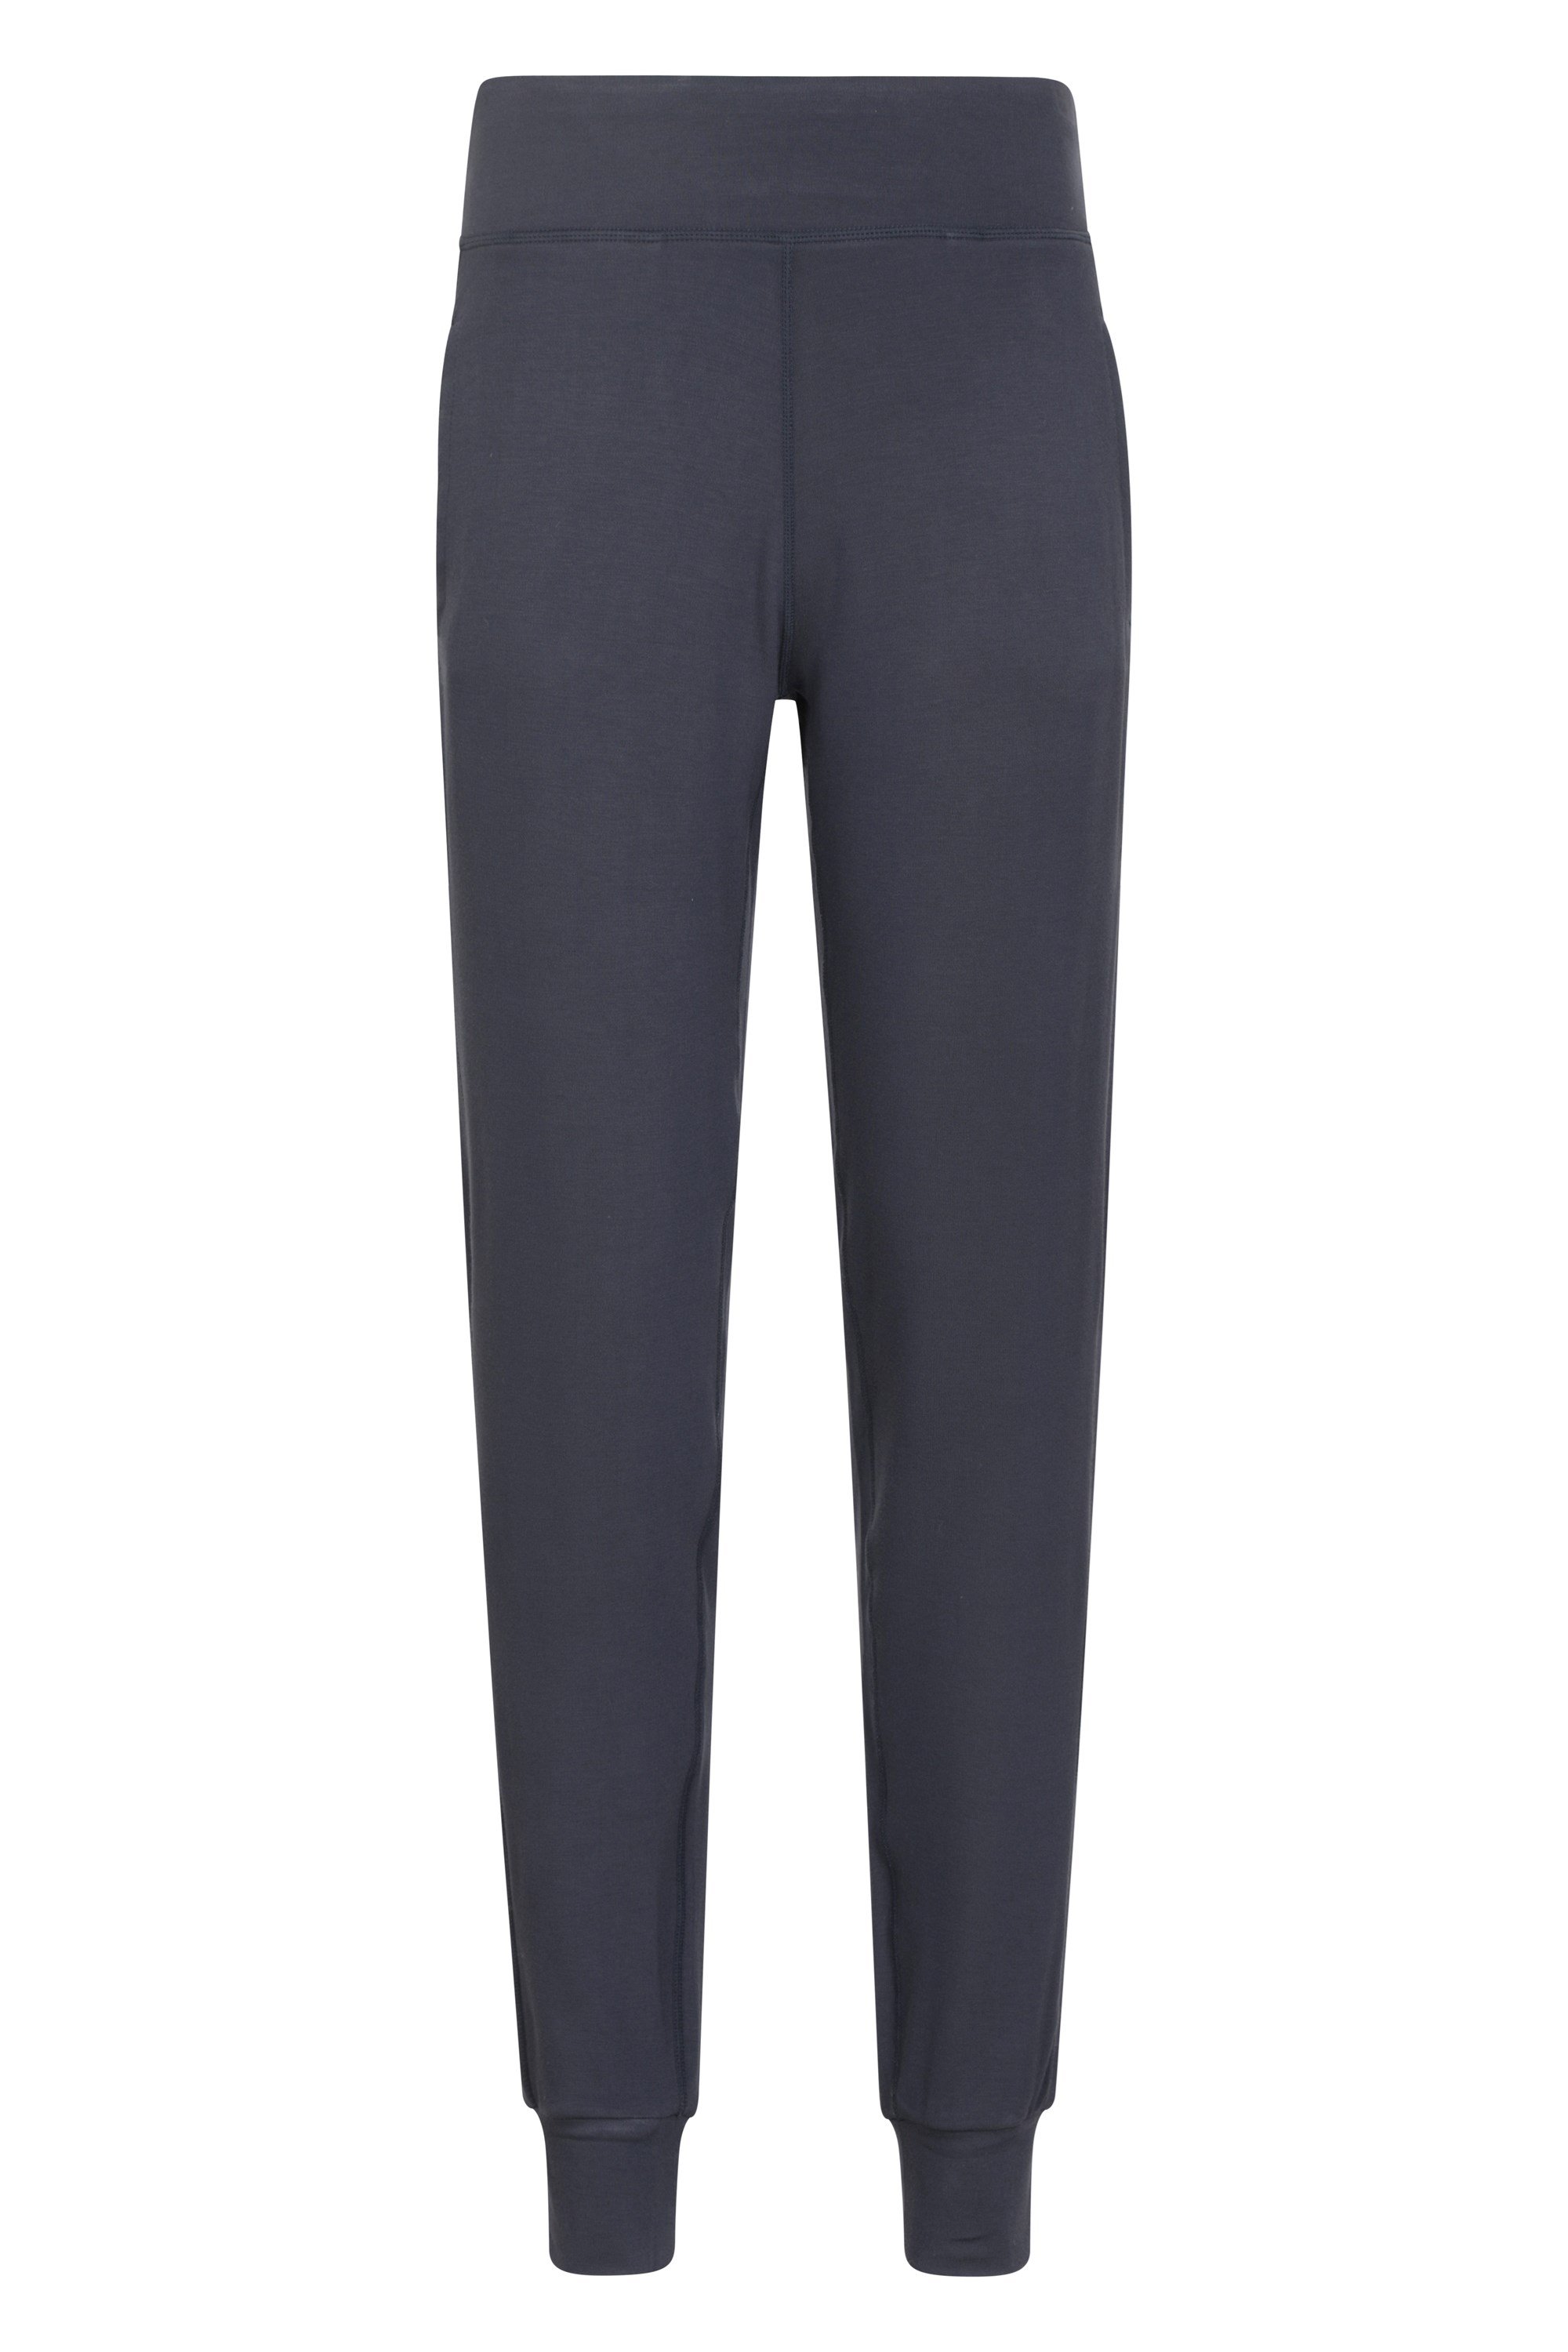 Bamboo Rich Womens Slouch Pants - Navy